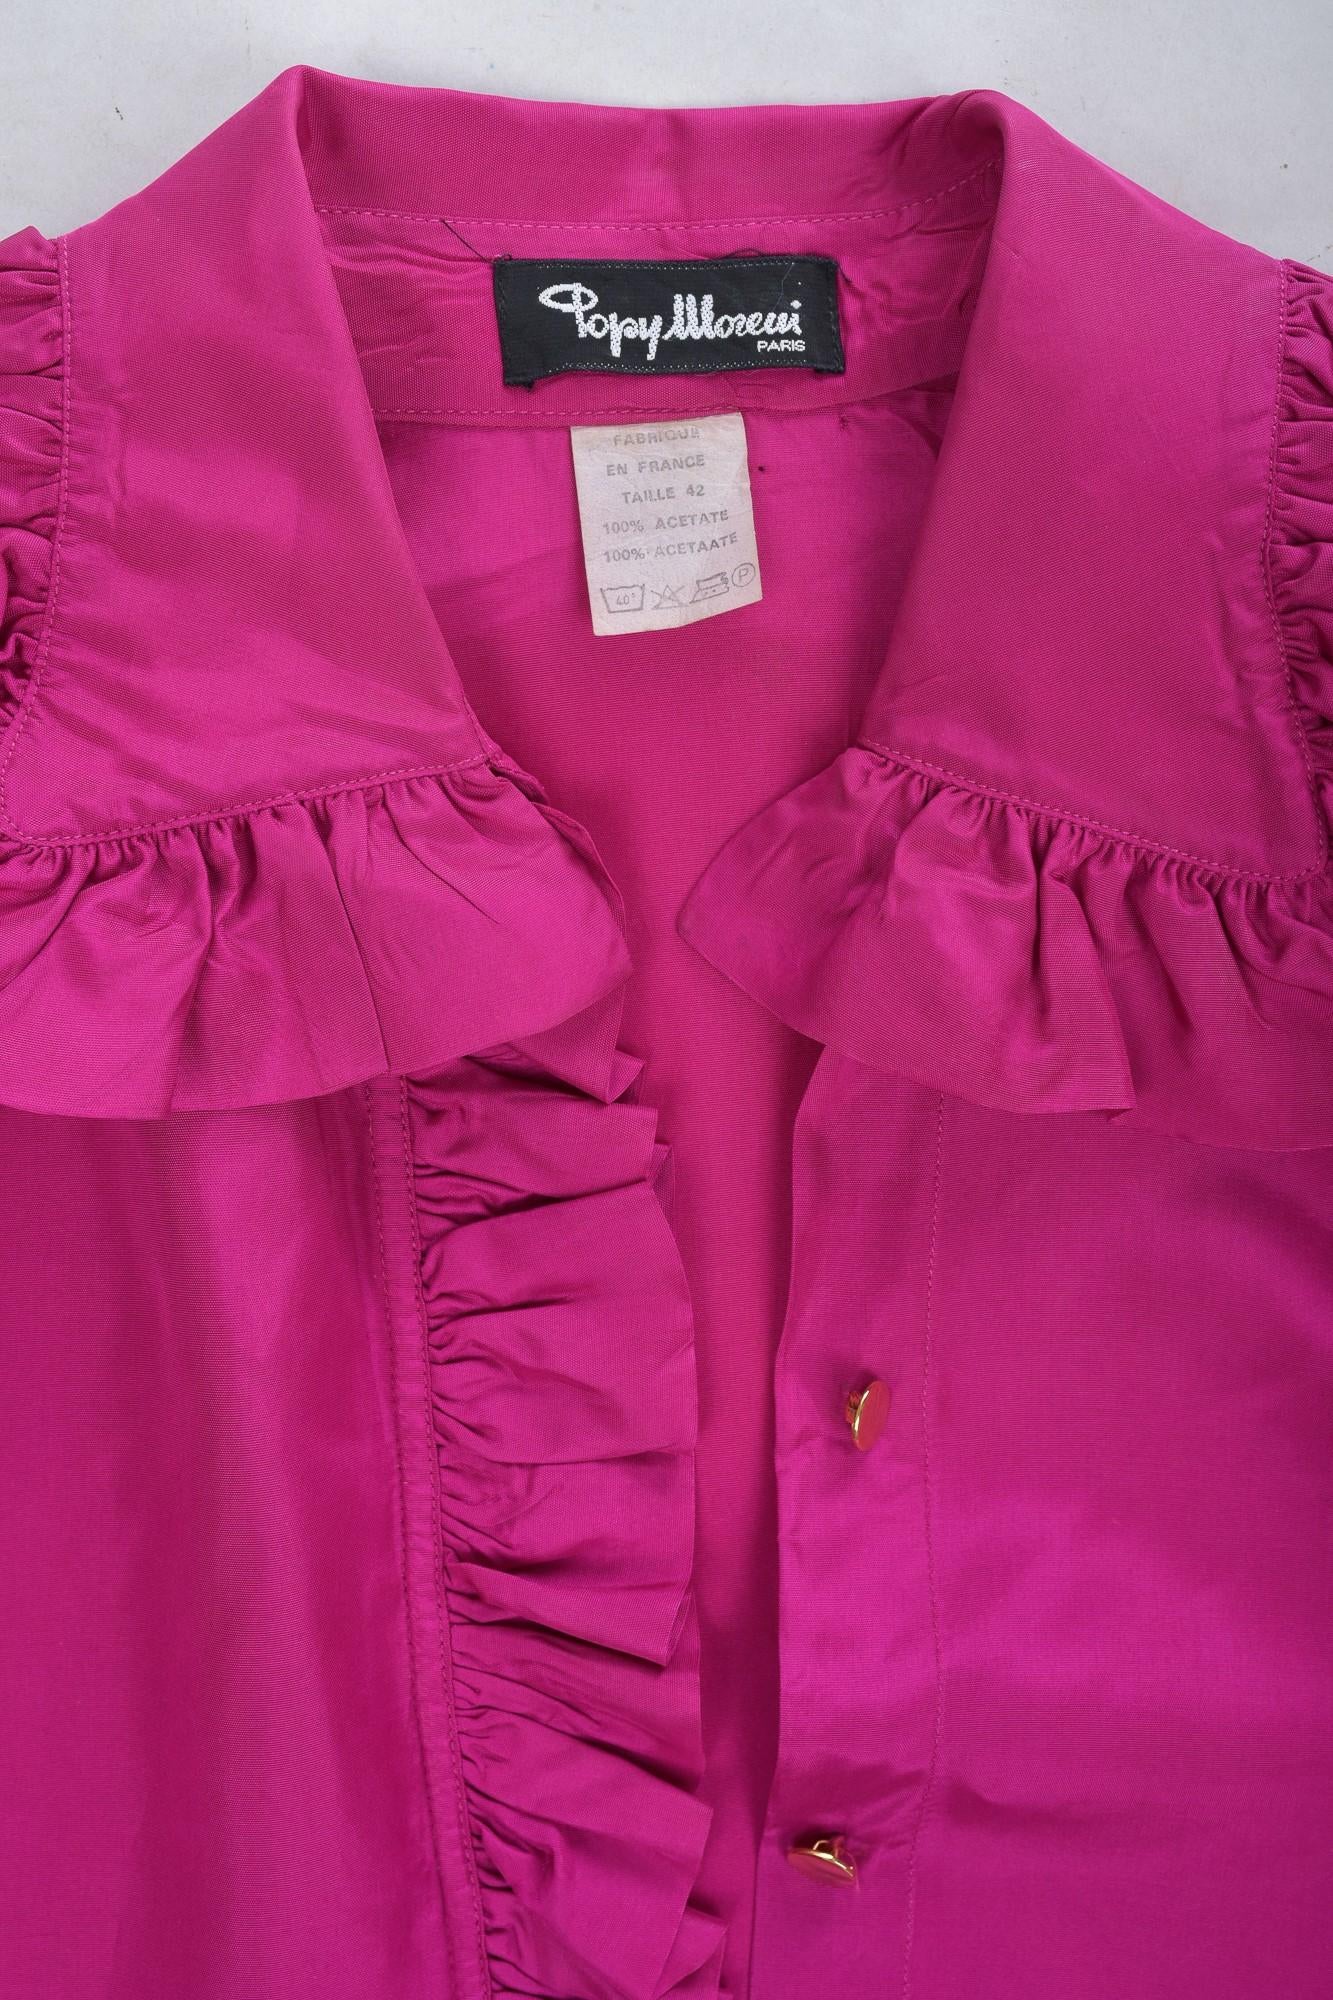 A French Fuschia Taffeta Blouse and skirt By Popy Moreni Paris Circa 1990 In Good Condition For Sale In Toulon, FR